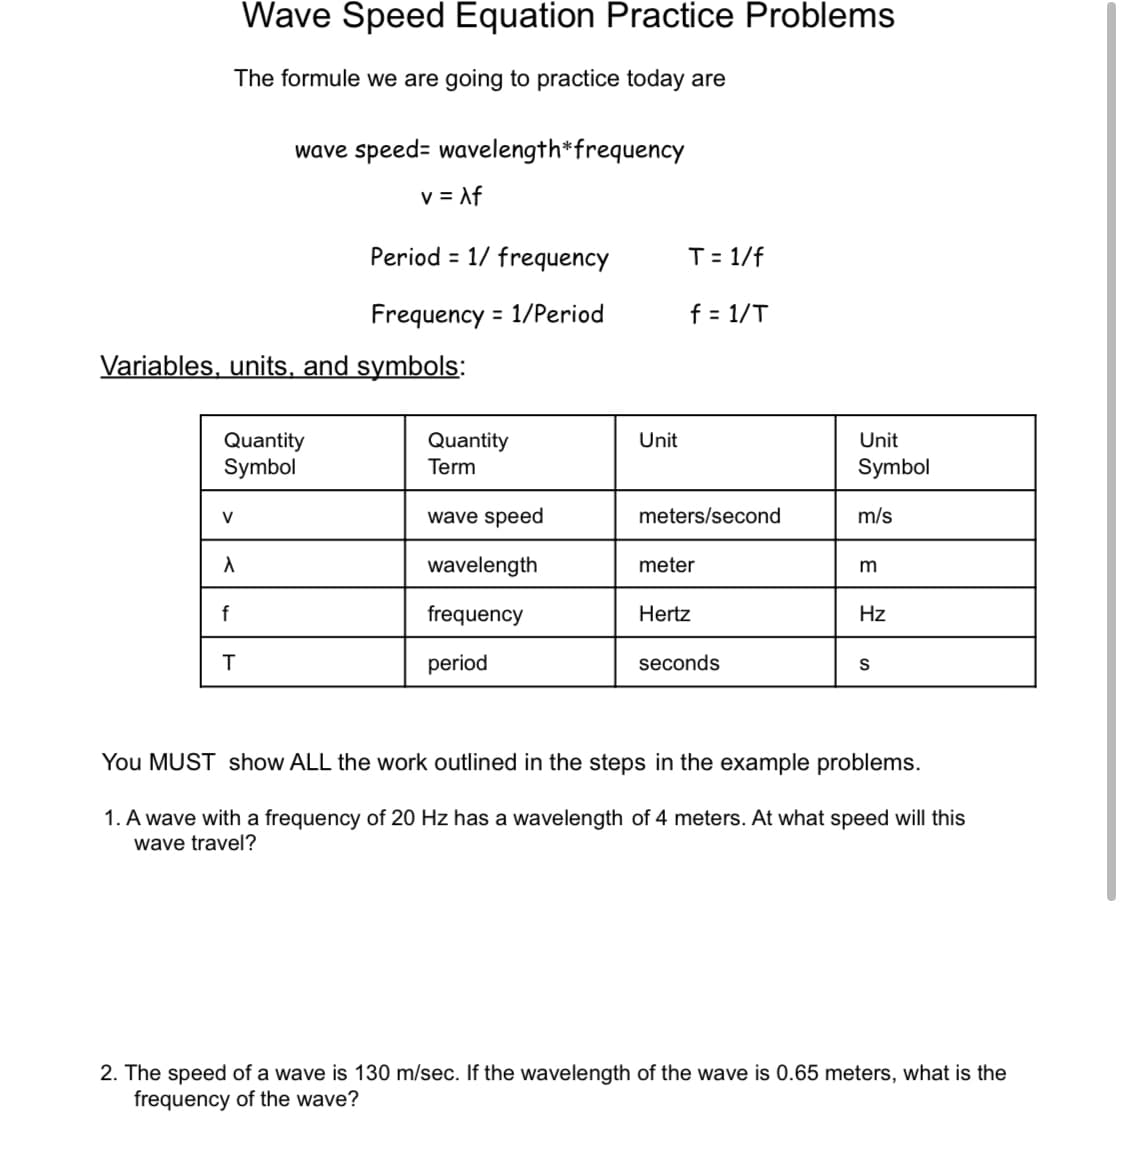 Wave Speed Equation Practice Problems
The formule we are going to practice today are
wave speed= wavelength*frequency
v = Af
Period = 1/ frequency
T= 1/f
Frequency = 1/Period
f = 1/T
Variables, units, and symbols:
Unit
Quantity
Symbol
Quantity
Term
Unit
Symbol
wave speed
meters/second
m/s
V
wavelength
meter
m
f
frequency
Hertz
Hz
T
period
seconds
S
You MUST show ALL the work outlined in the steps in the example problems.
1. A wave with a frequency of 20 Hz has a wavelength of 4 meters. At what speed will this
wave travel?
2. The speed of a wave is 130 m/sec. If the wavelength of the wave is 0.65 meters, what is the
frequency of the wave?
